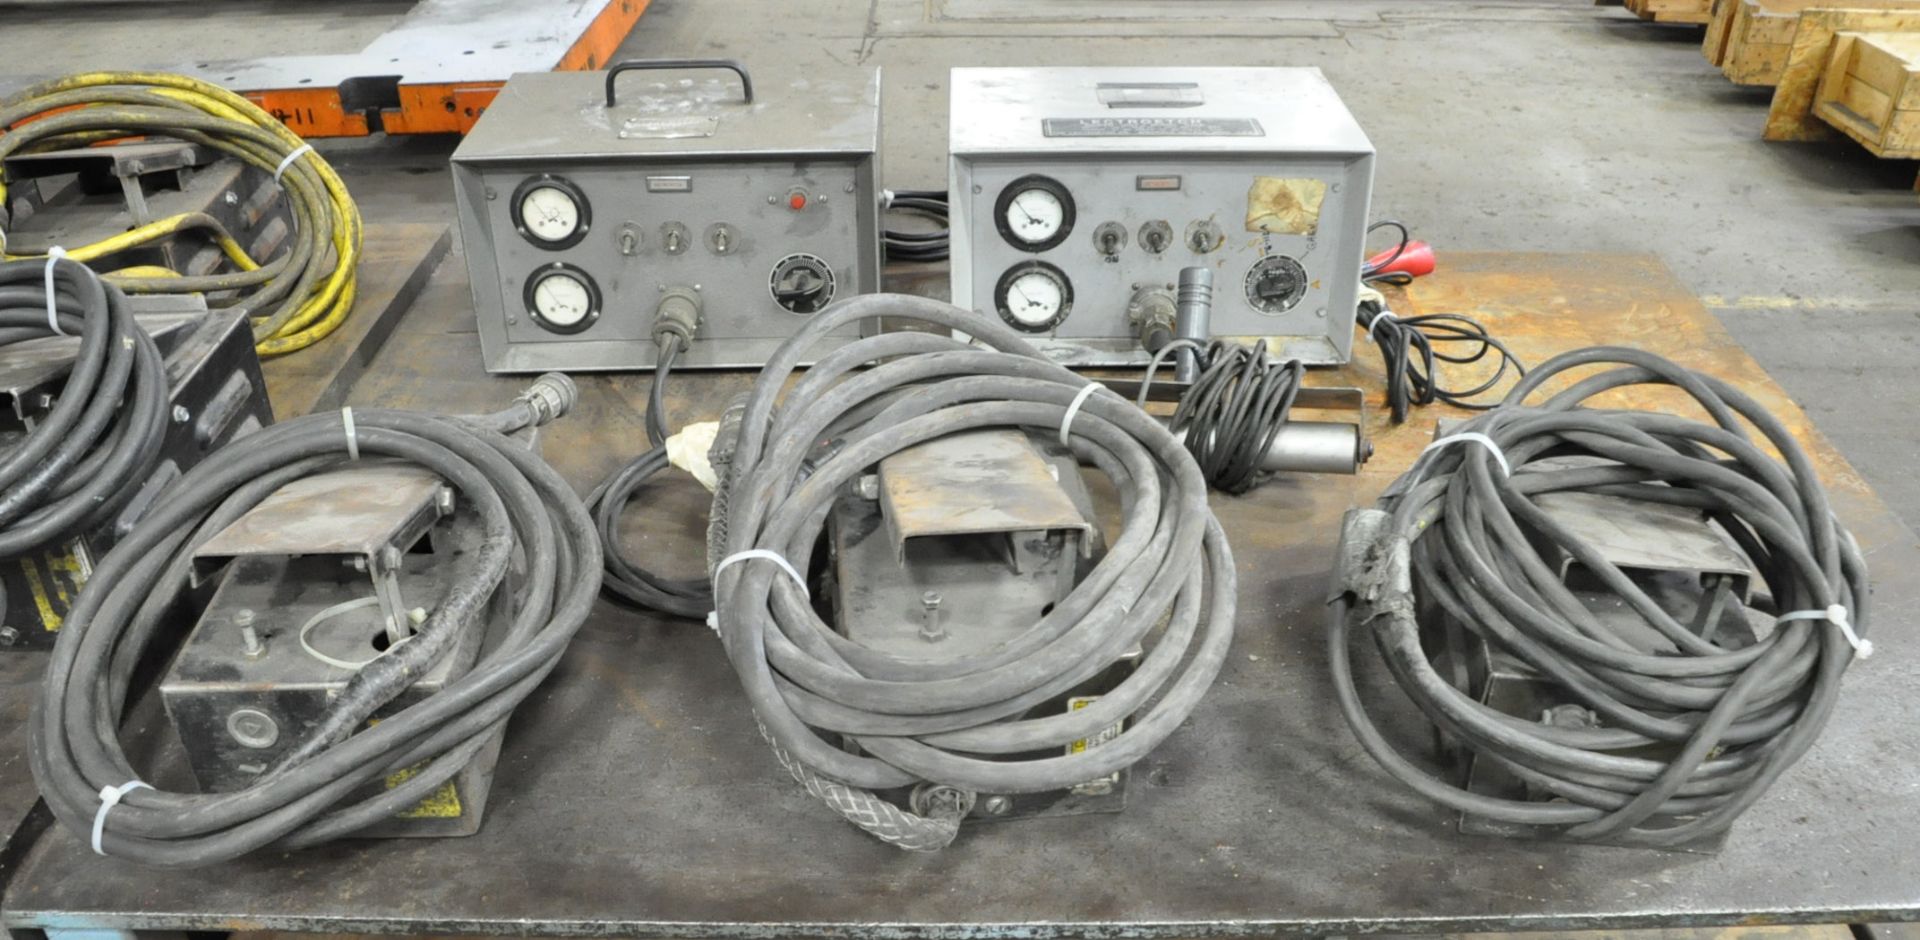 Lot-Welding Wire, Foot Pedals and (2) Lectroetch Units, (E-16), (Pink Tag) - Bild 3 aus 3